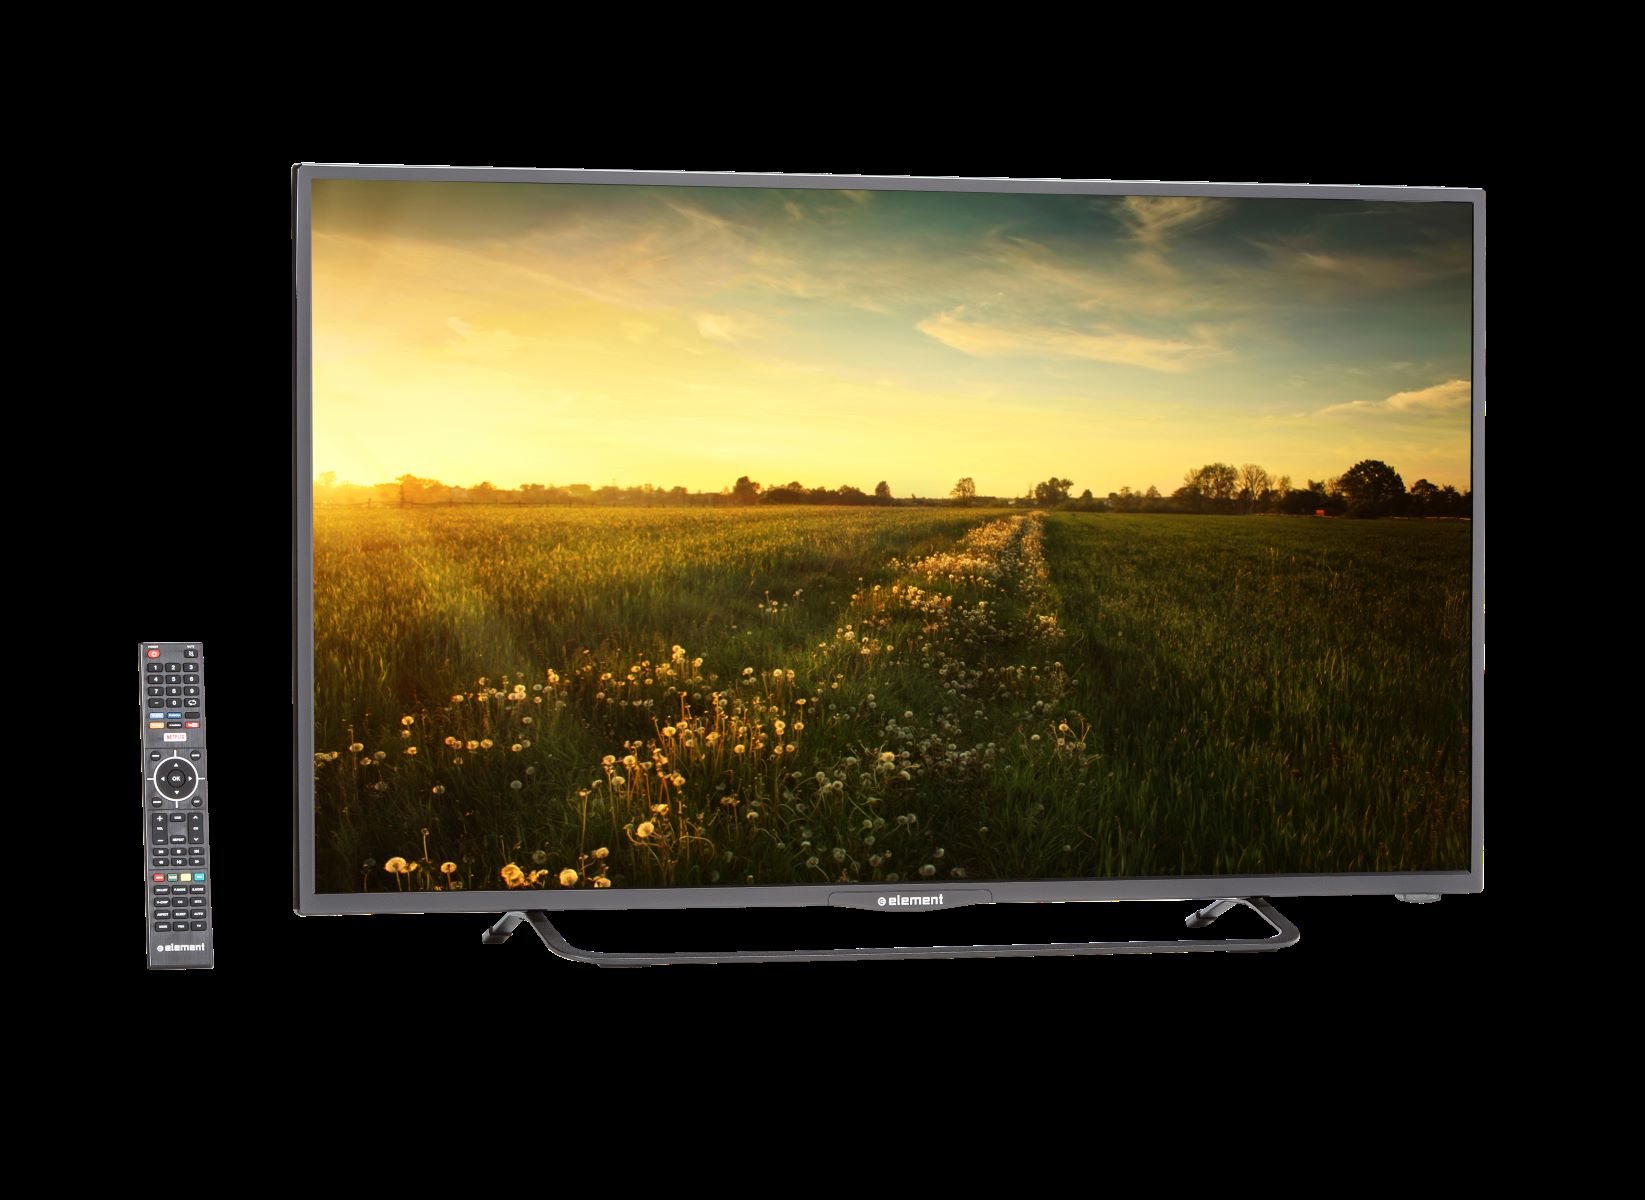 Element TVs: The Ultimate Review